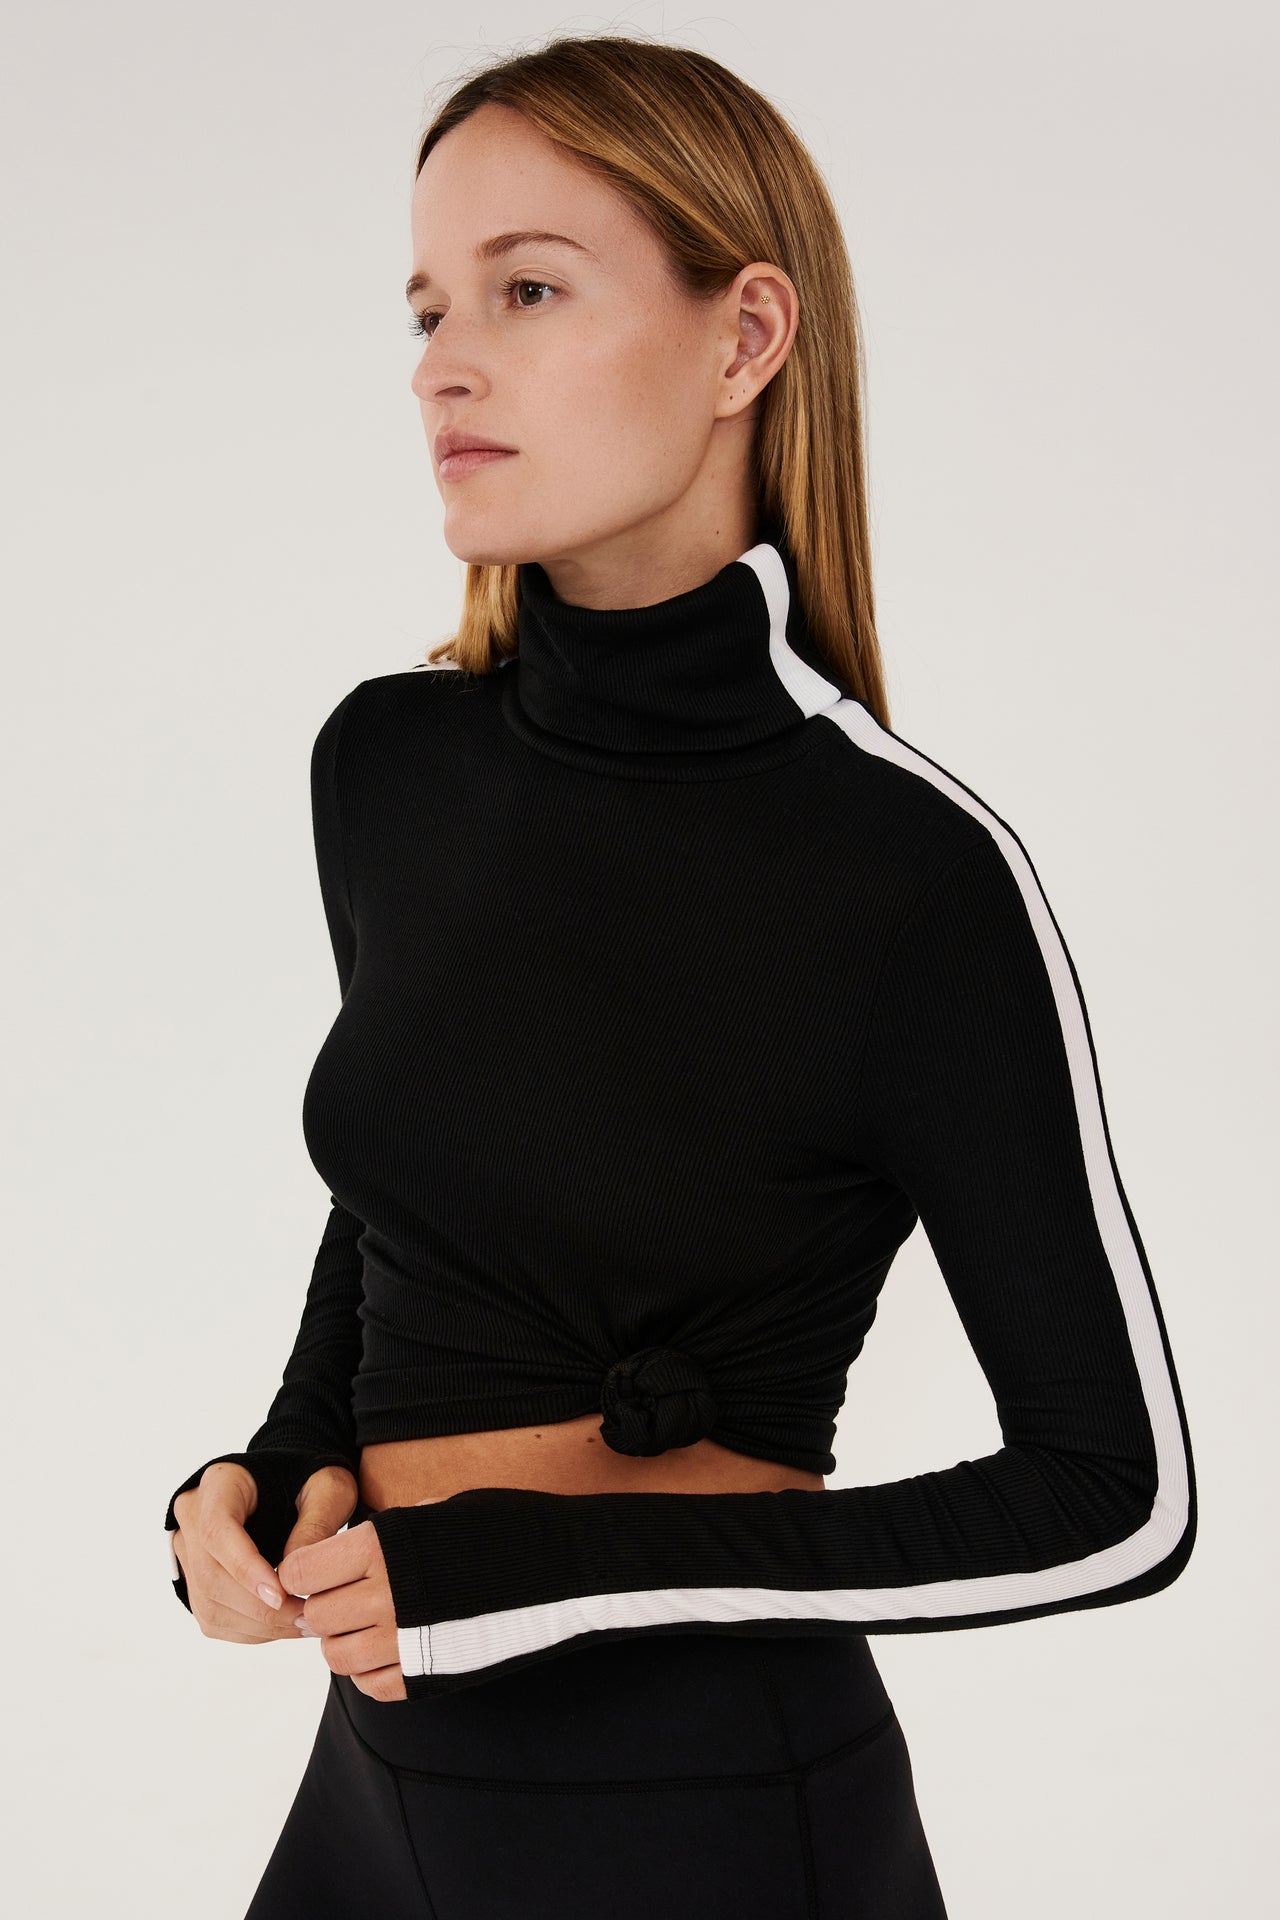 A woman wearing a black SPLITS59 Jackson Rib Full Length Turtleneck top and white leggings designed for running with enhanced coverage.